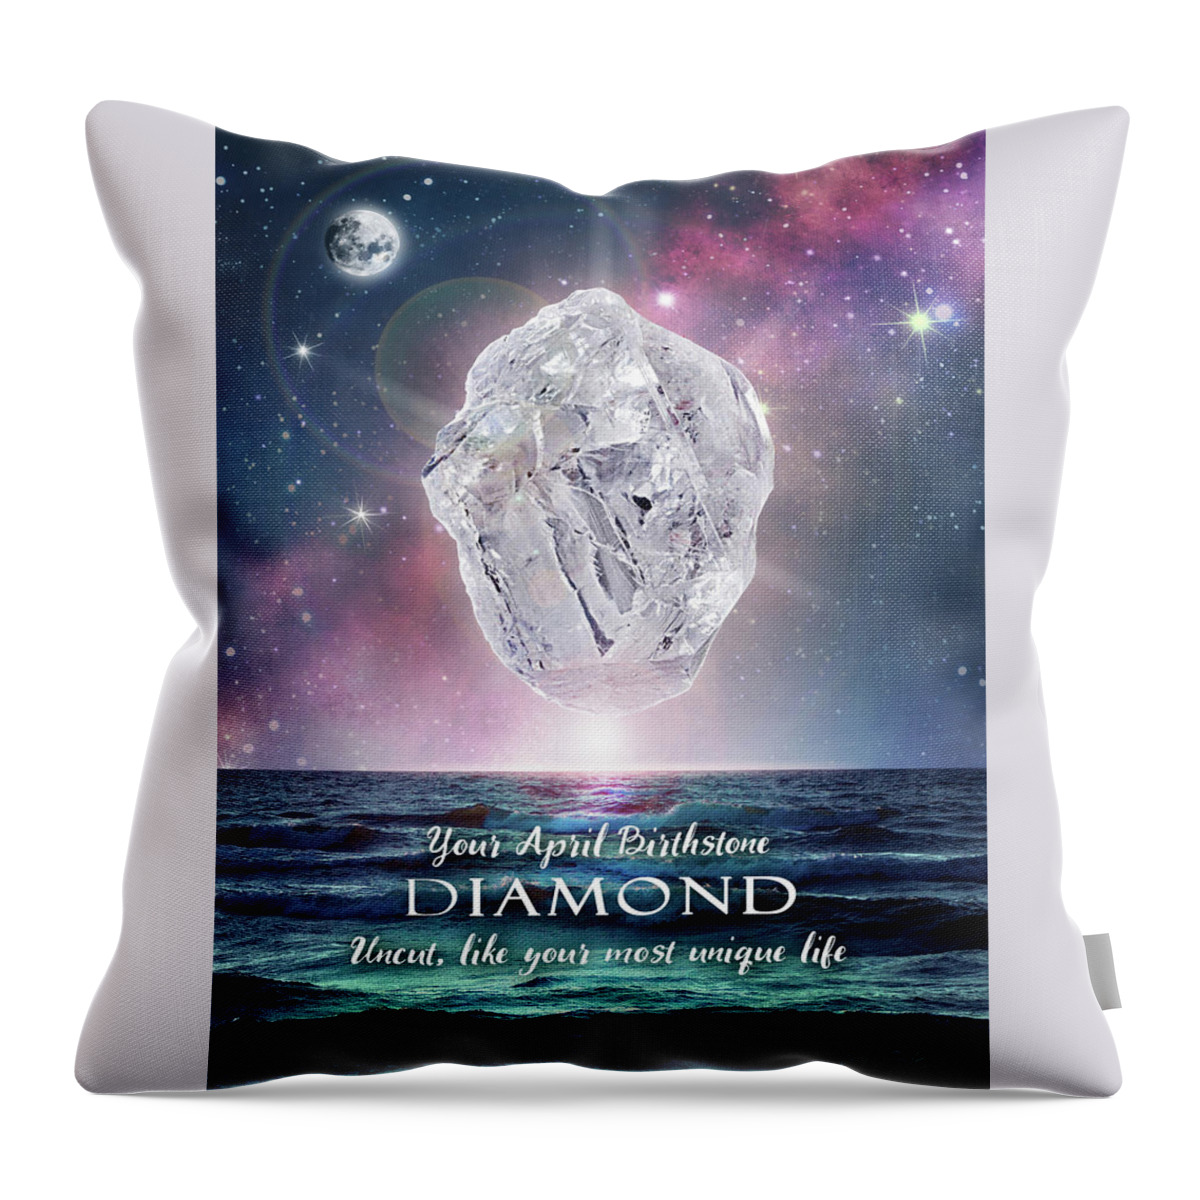 April Throw Pillow featuring the digital art April Birthstone Diamond by Evie Cook